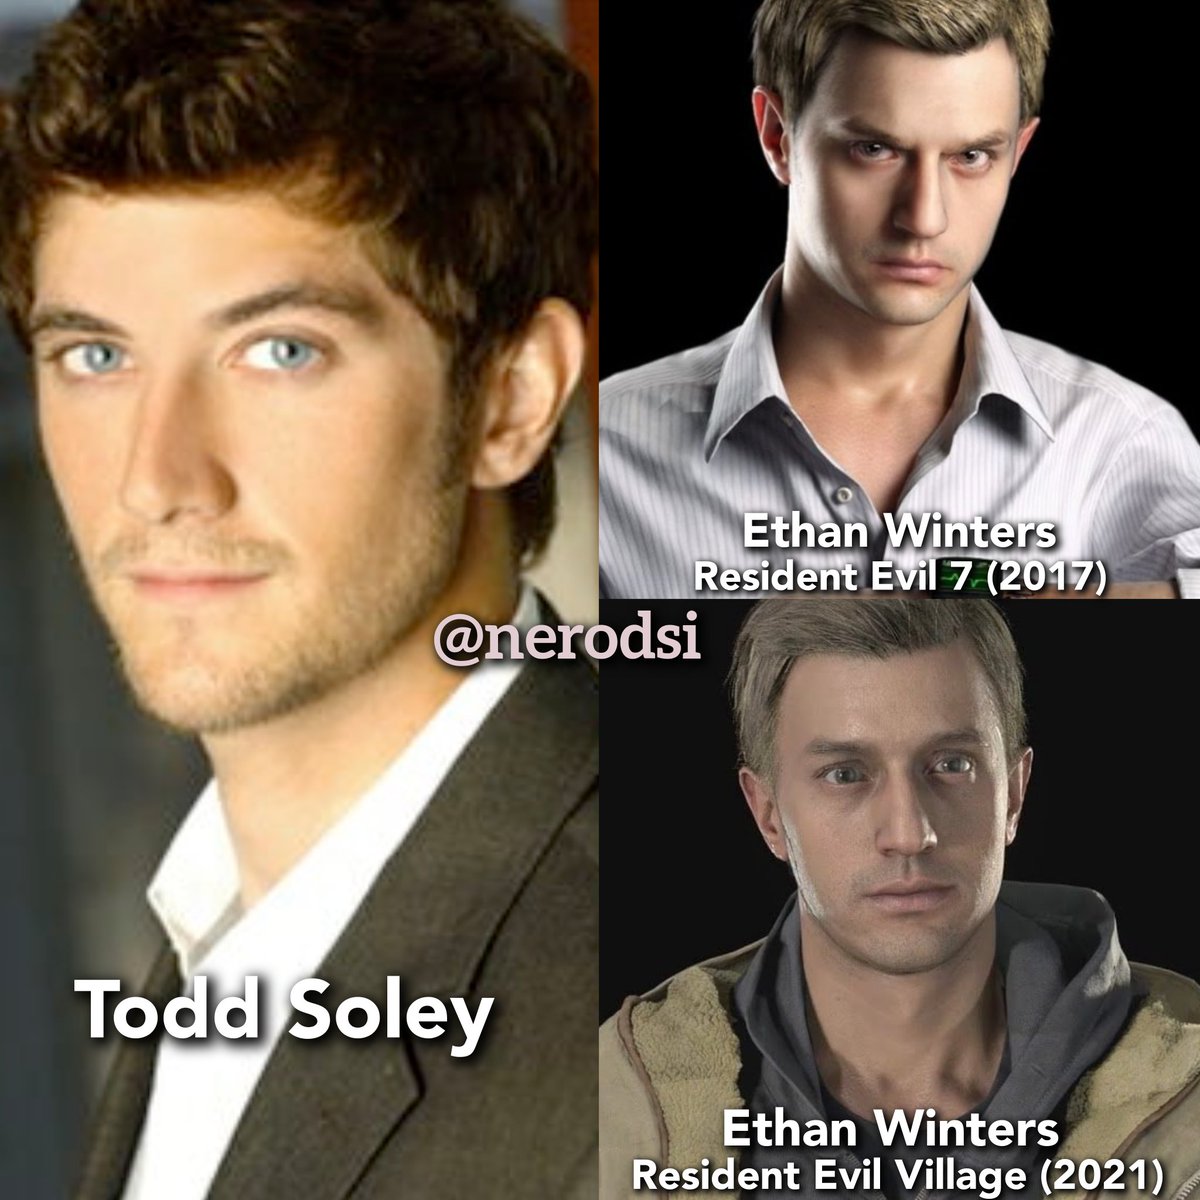 Todd Soley is the voice actor for Ethan Winters in Resident Evil 7 (2017) & Resident Evil Village (2021) 

(Made by me) 

#ResidentEvil #REBHFun #REBH28th #RE #EthanWinters #RE7 #ResidentEvil7 #ResidentEvilVillage #Biohazard #Capcom